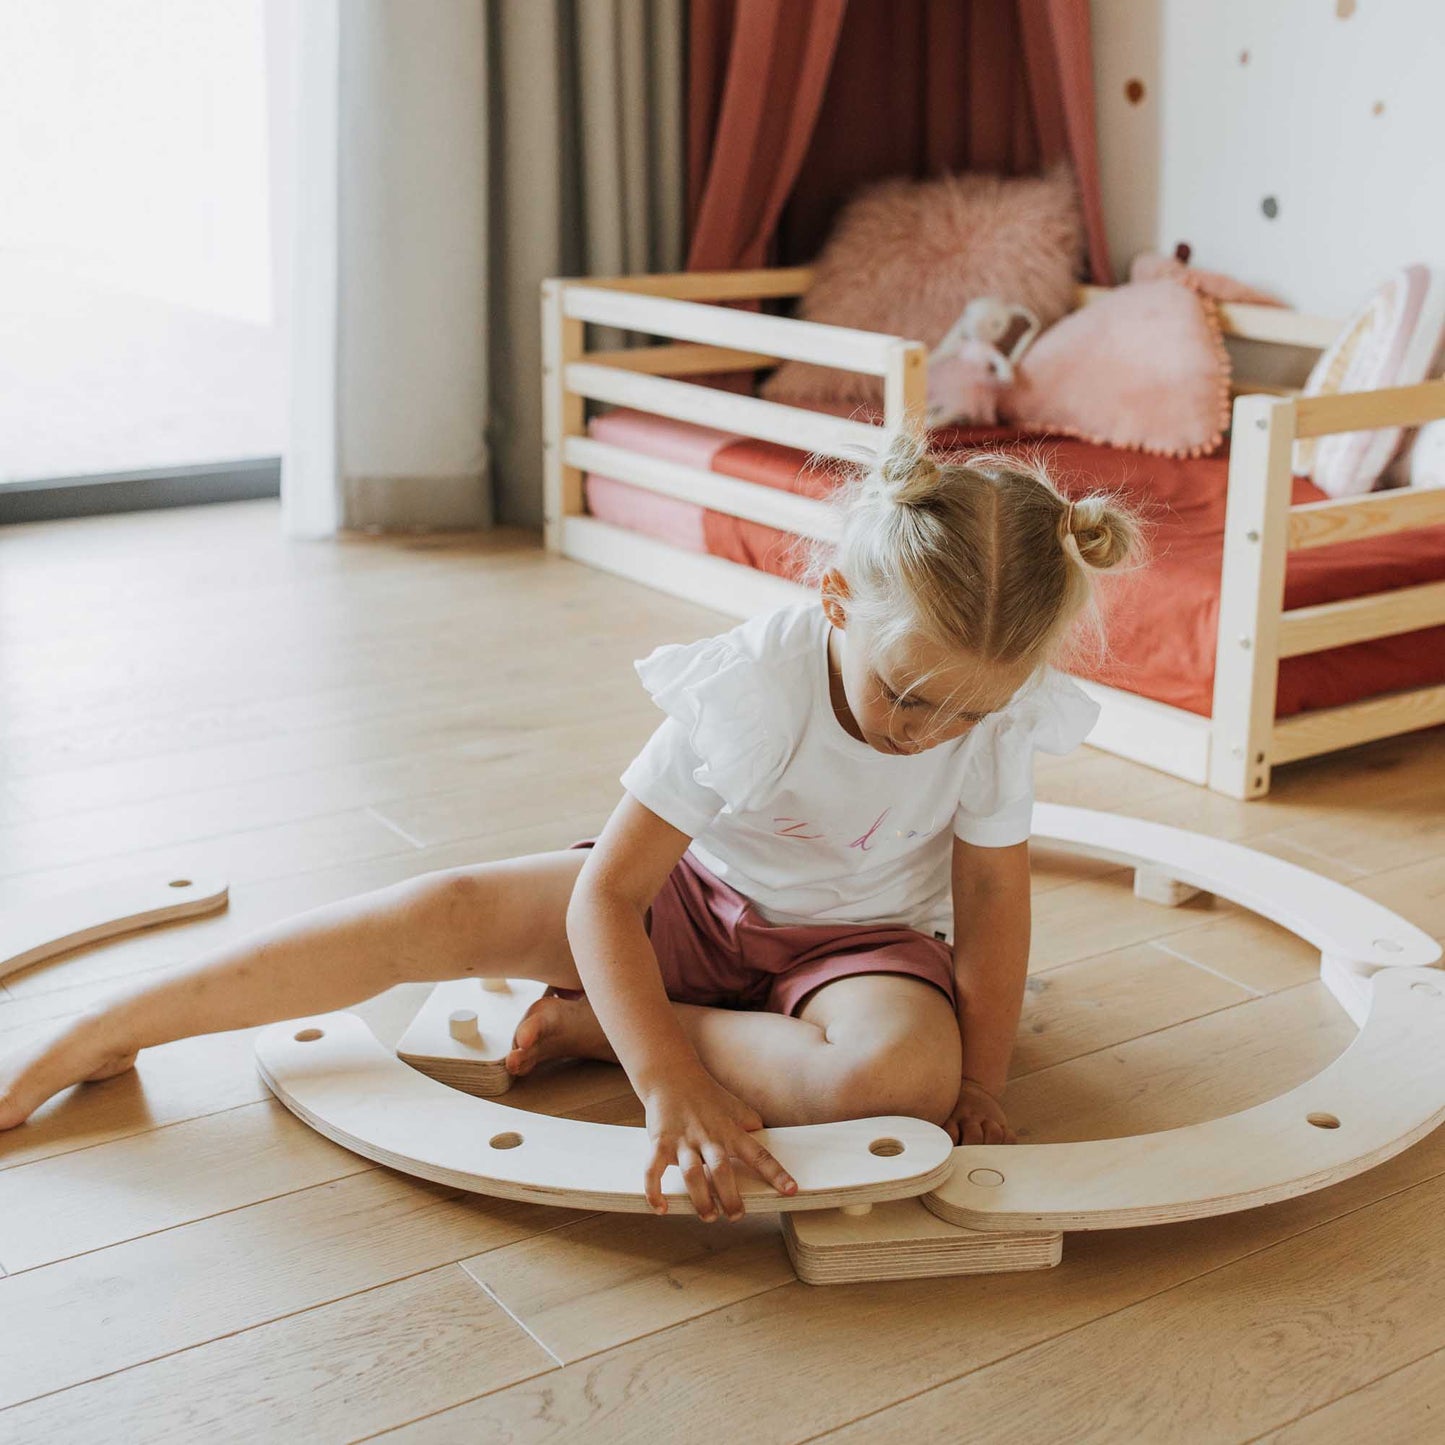 A little girl, on her first or second birthday, happily playing with a set of round balance beams in a room.